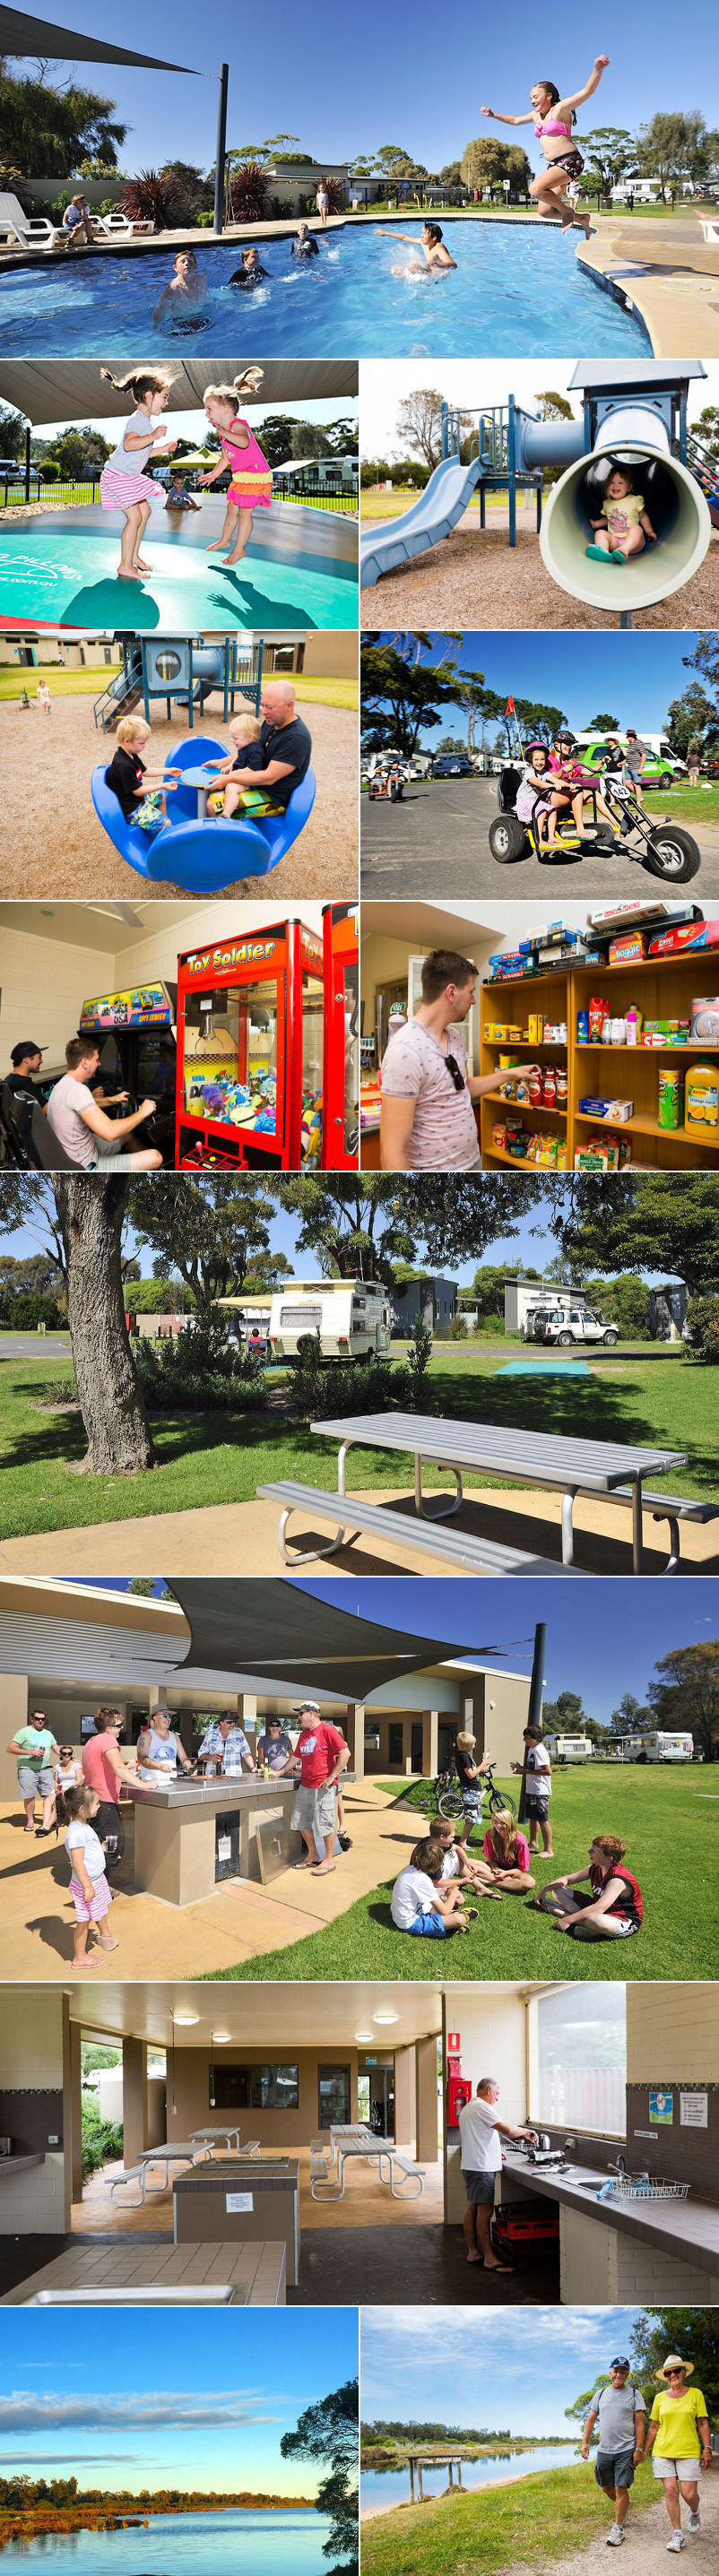 NRMA Eastern Beach Holiday Park - Grounds and facilities